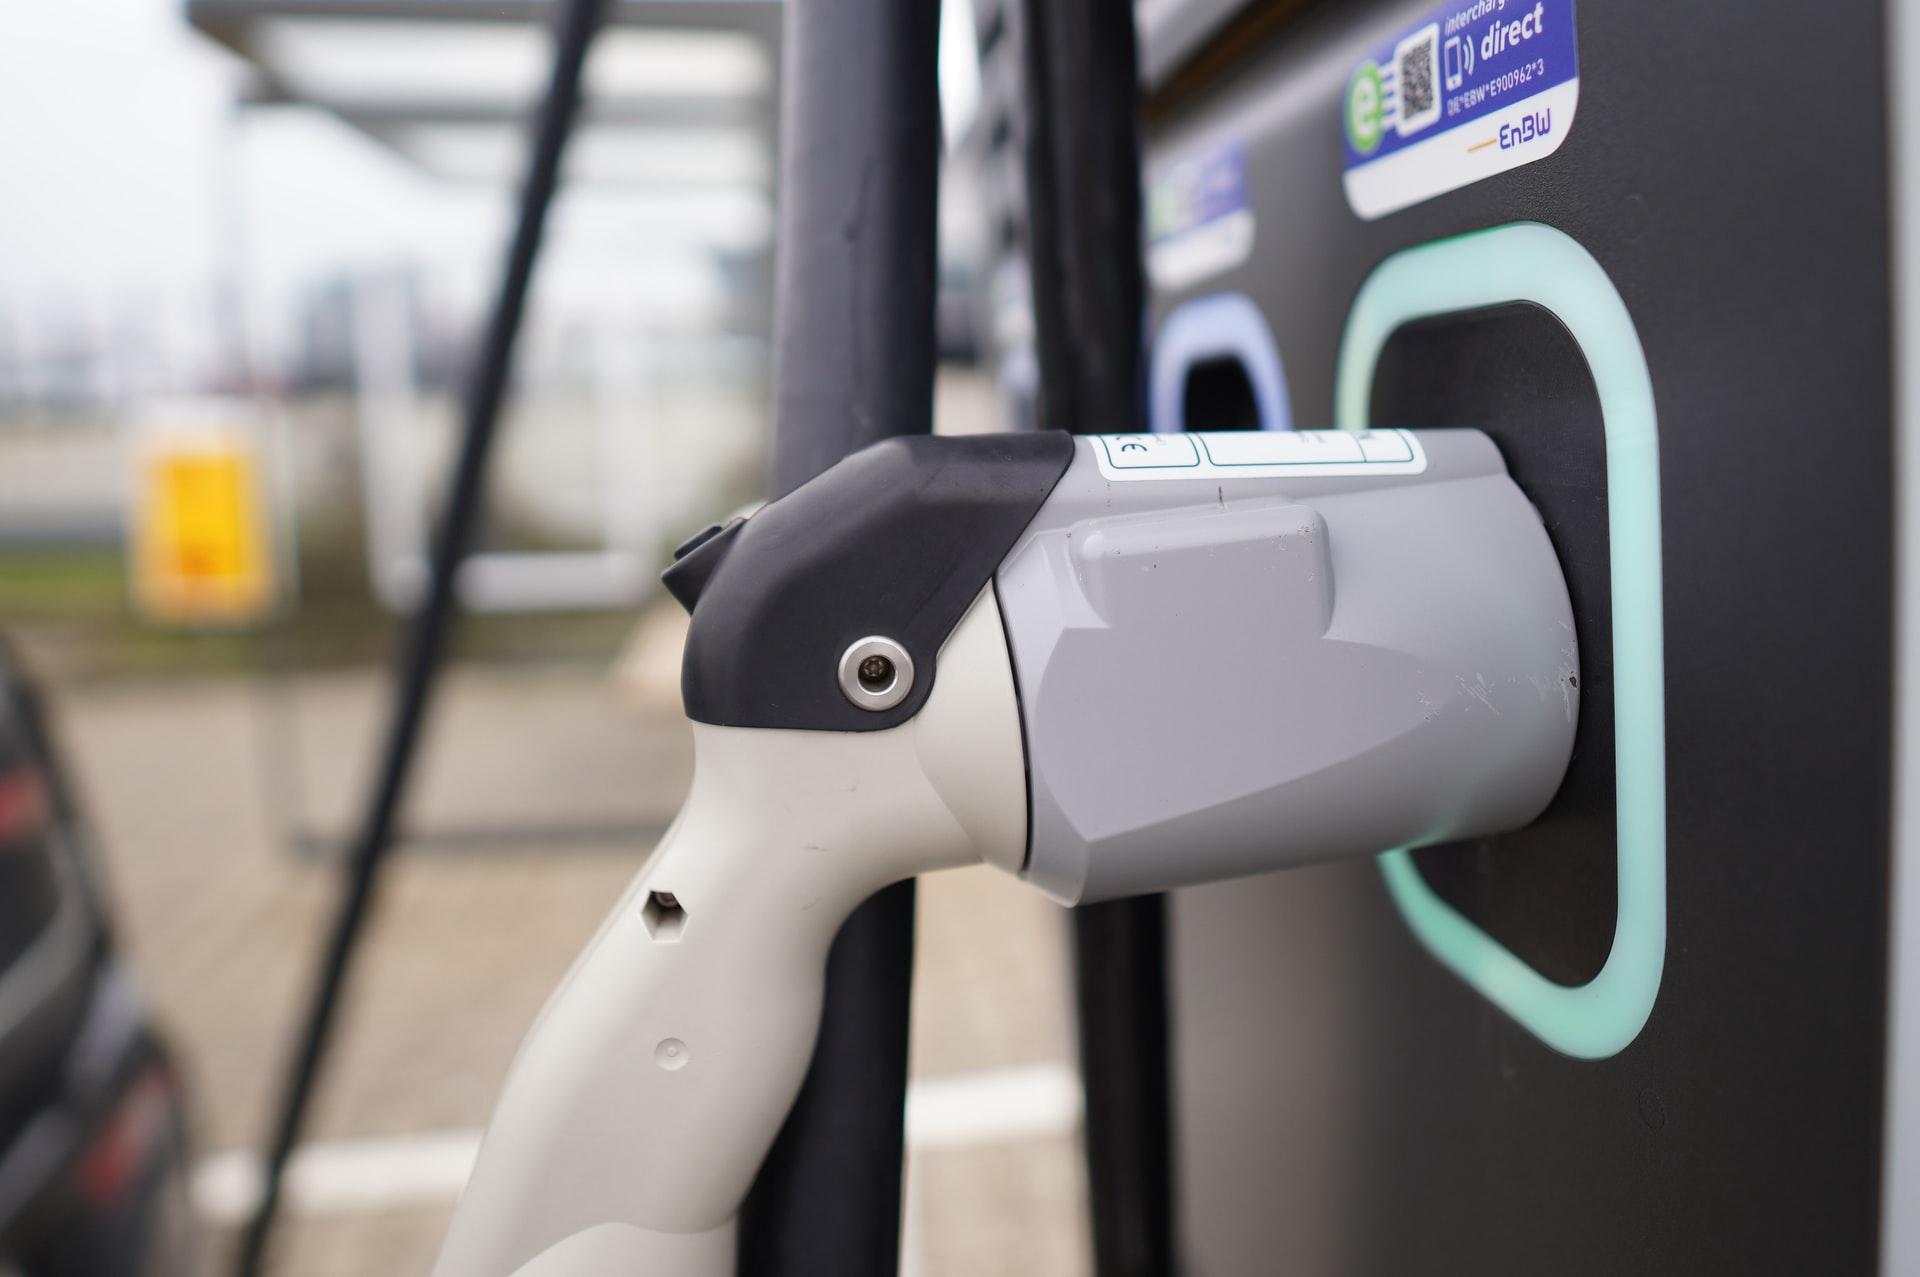 Norway might be able to phase out gas cars by April 2022.